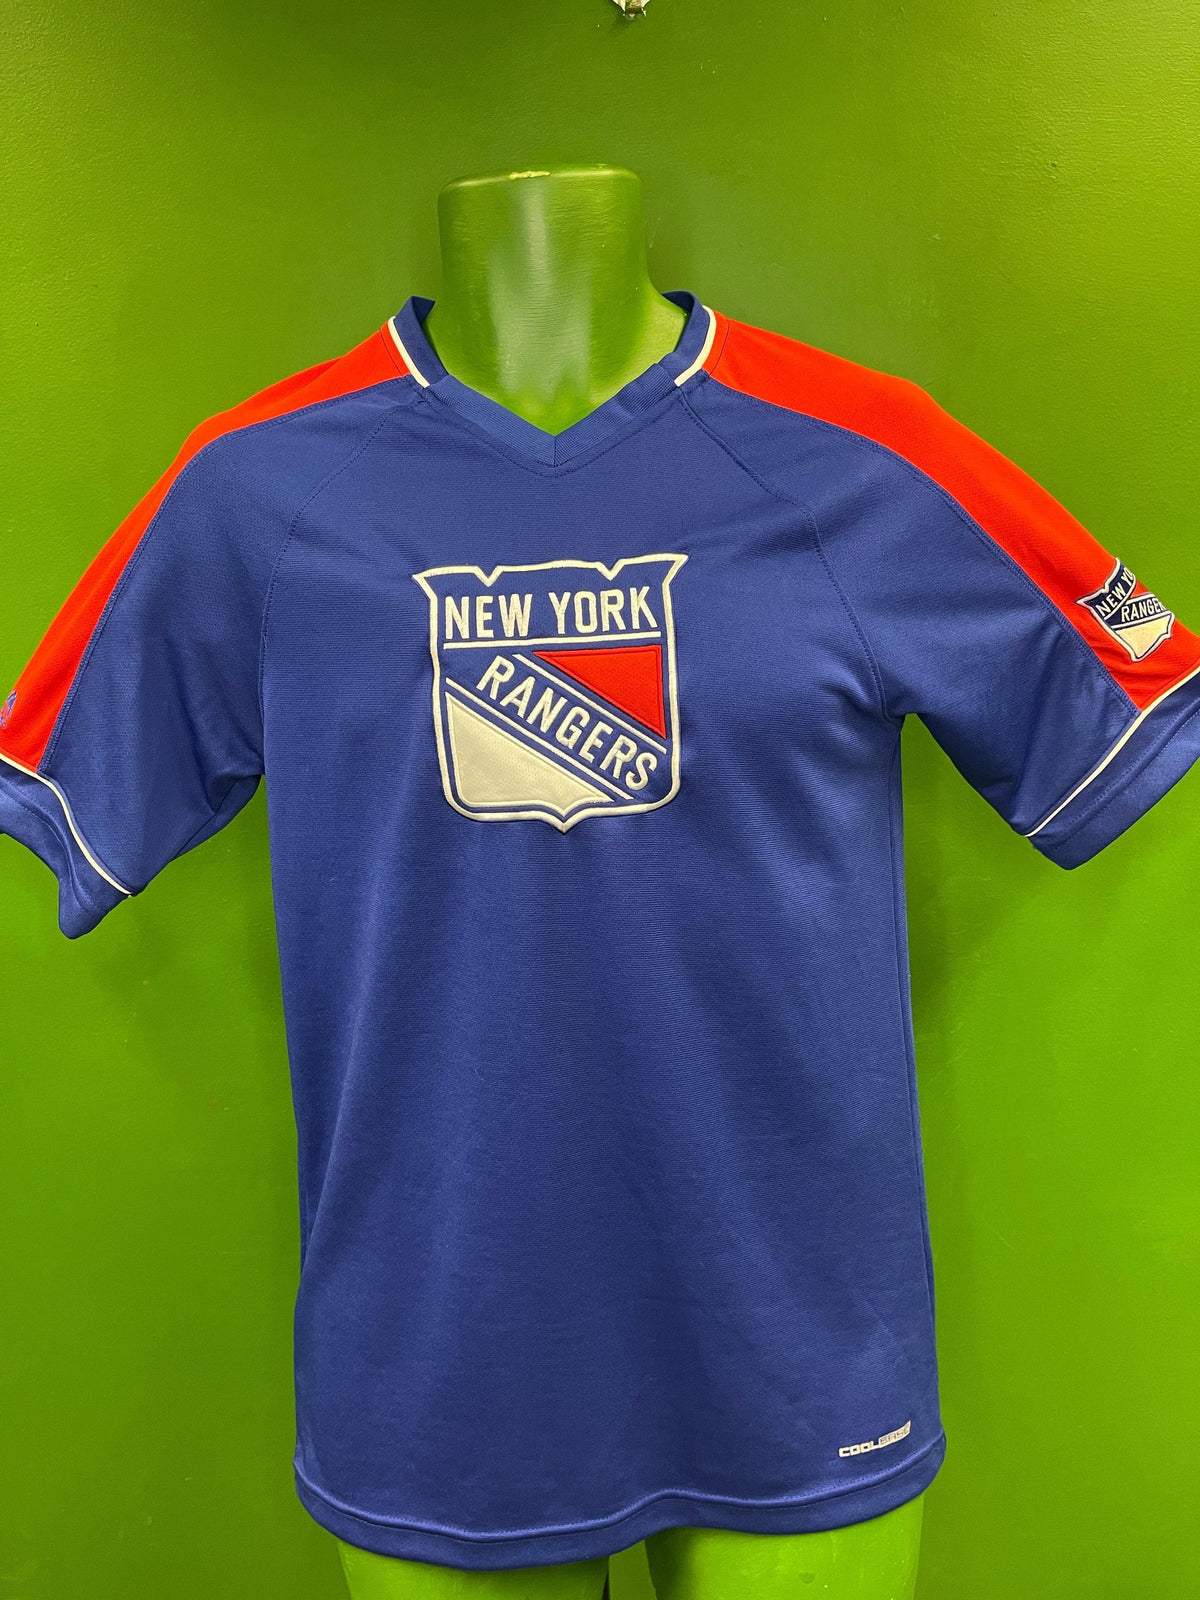 NHL New York Rangers Majestic Stitched Jersey-Style Top Men's Small